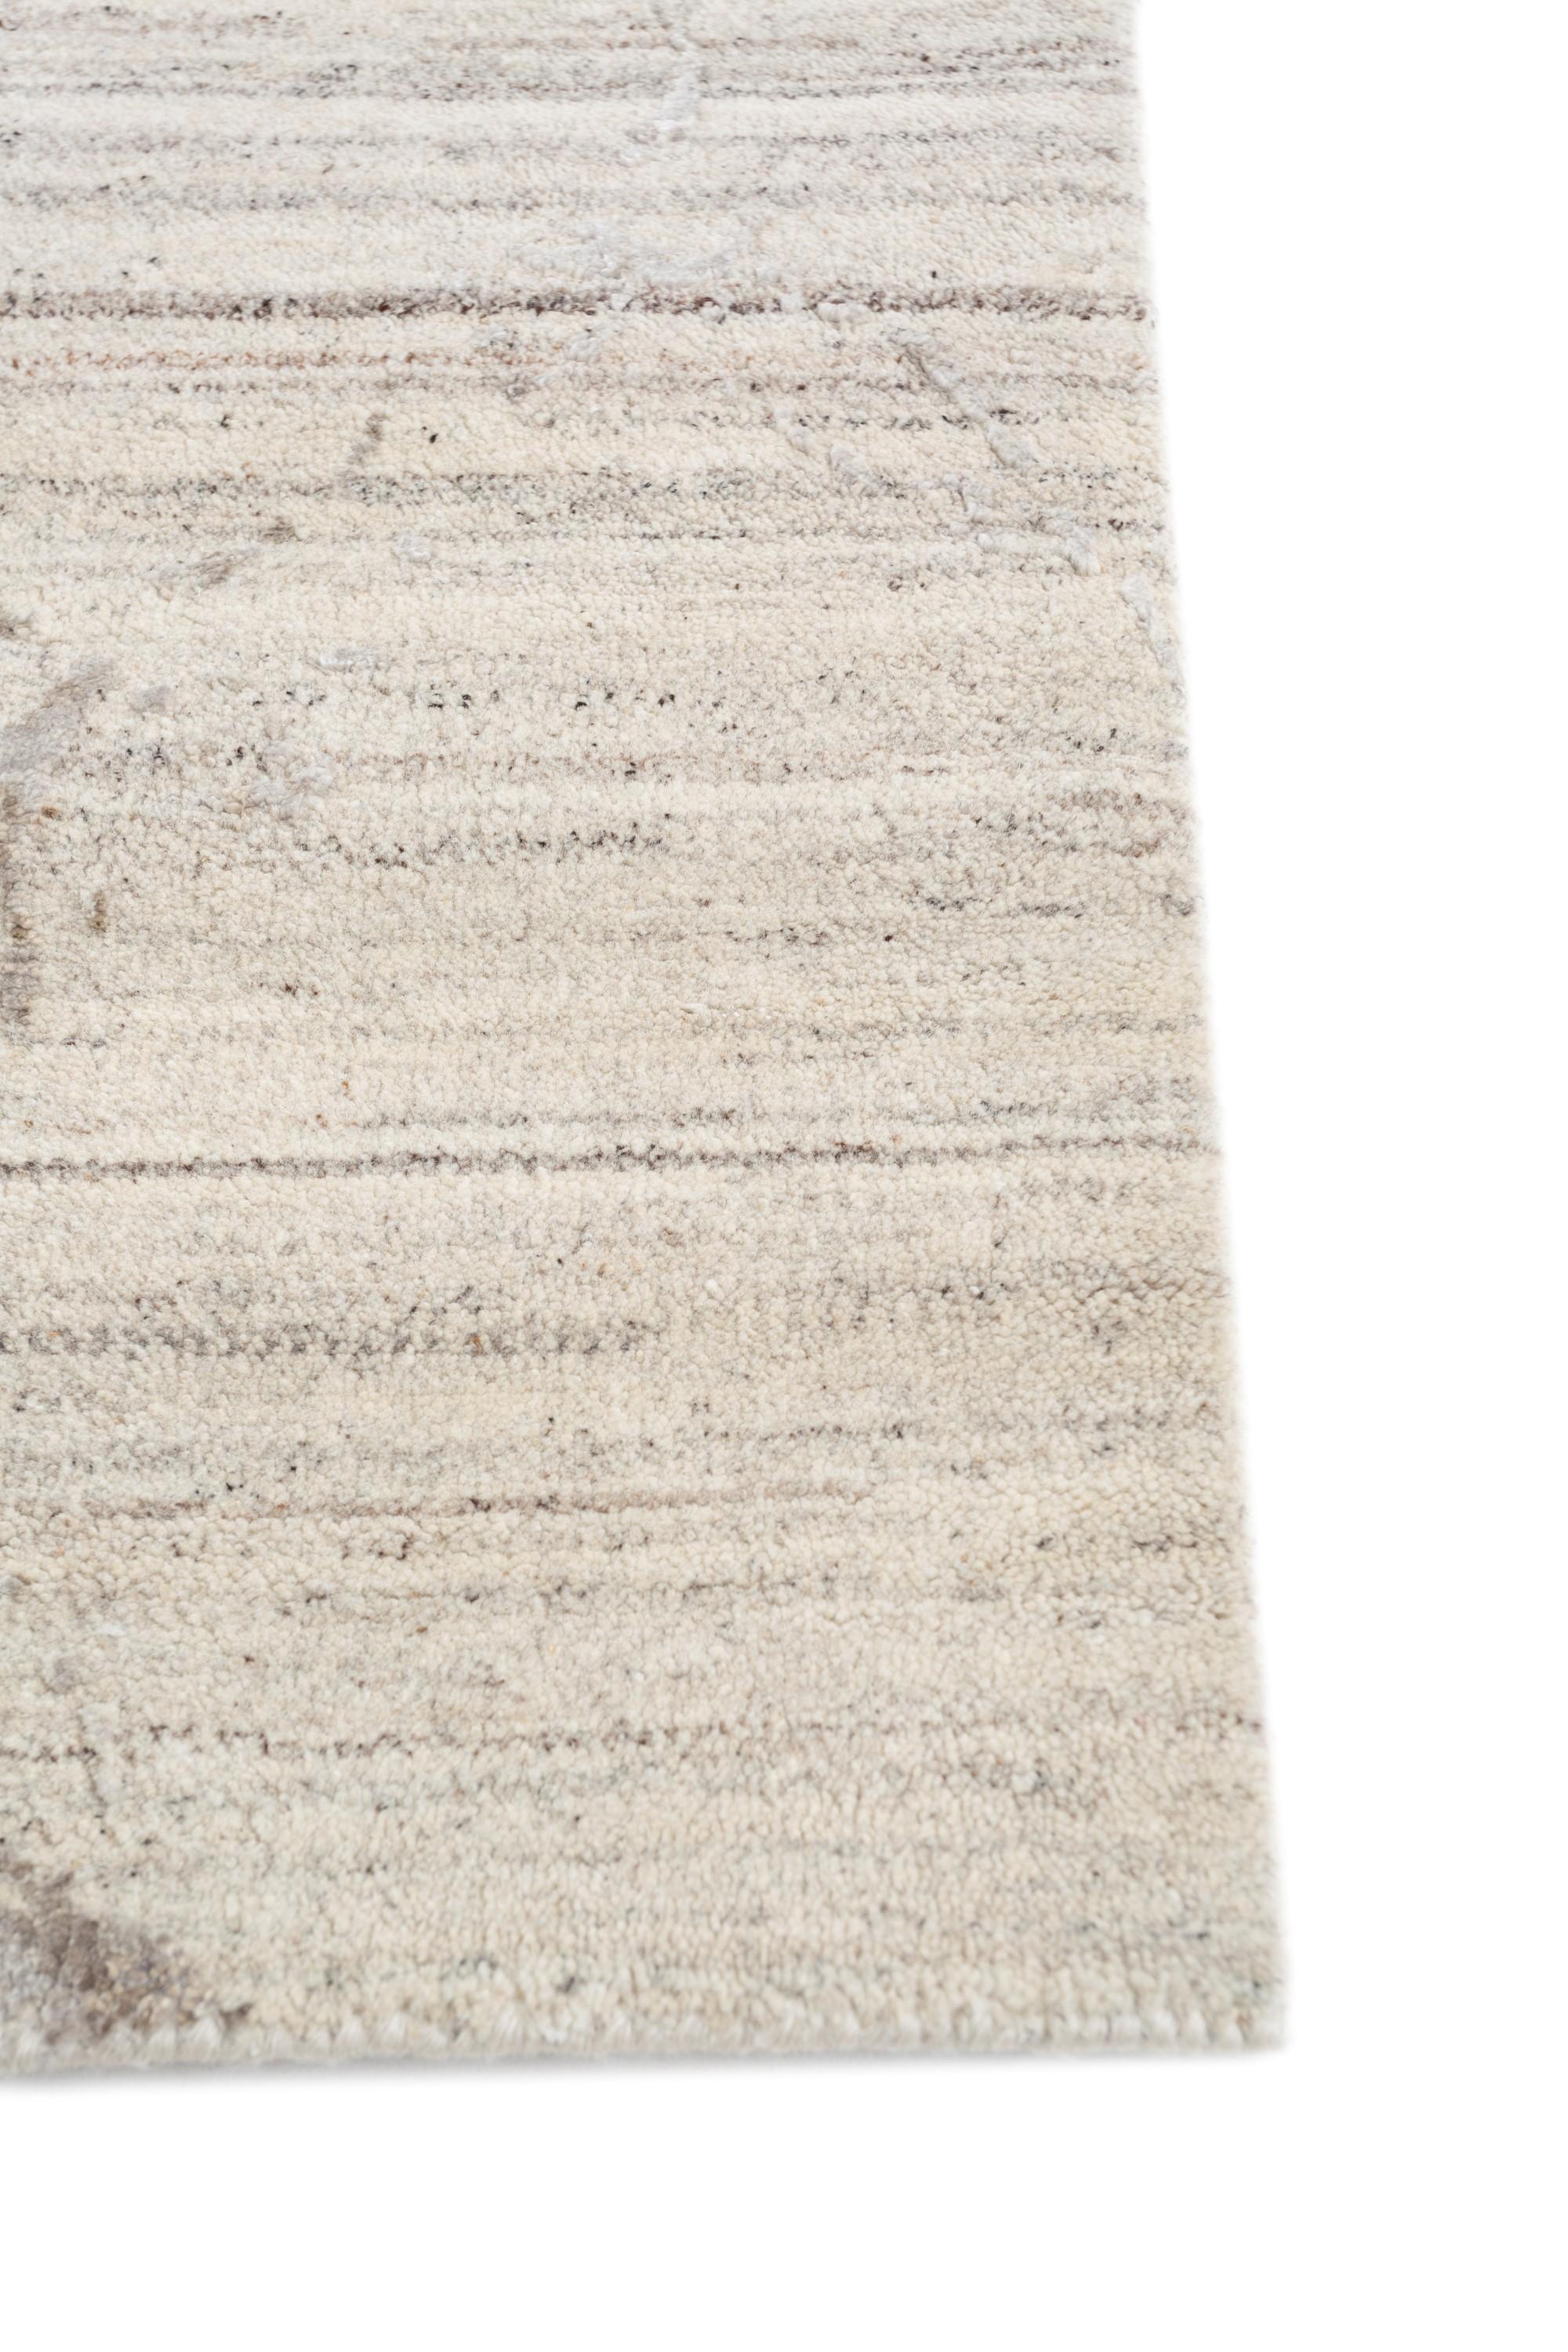 Embark on a journey of serenity with this hand-knotted rug  featuring abstract designs that echo the unrushed quality of natural processes. Designed to inspire a step away from the rush, its white chalk base and shale border create a calming oasis.